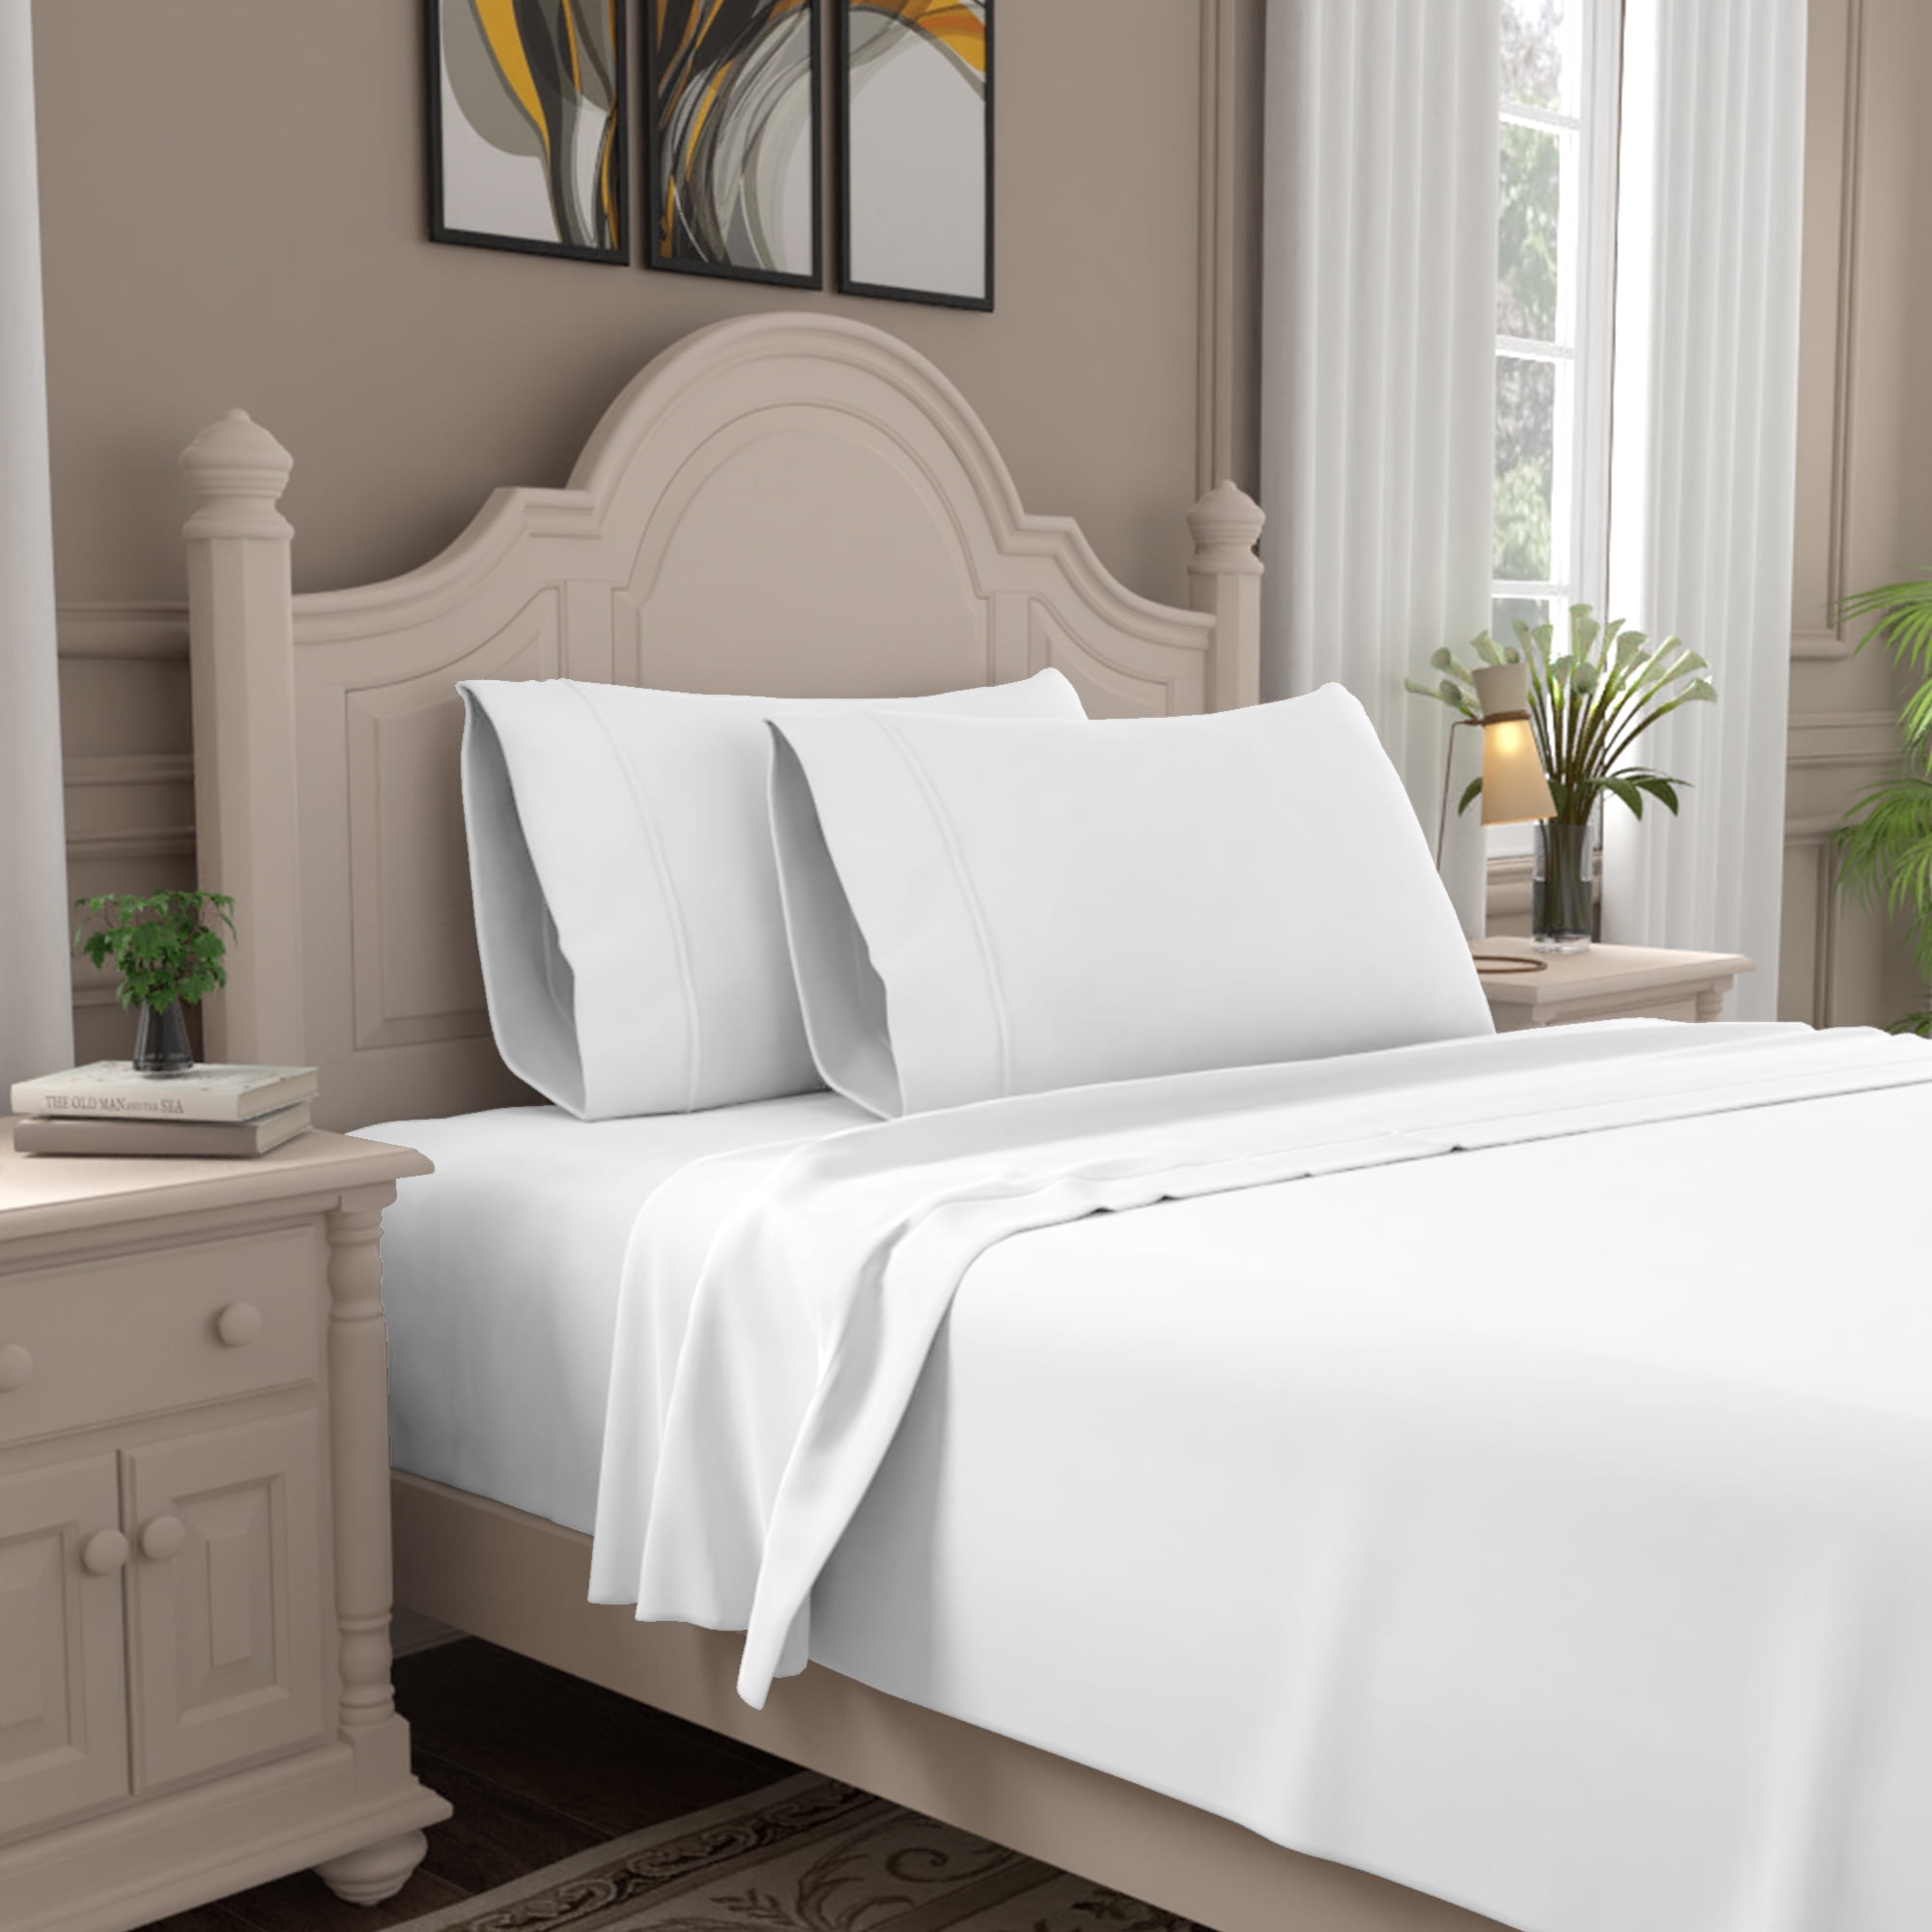 Queen 400 Thread Count Wrinkle Free Cotton Sheet Set Ivory - Purity Home